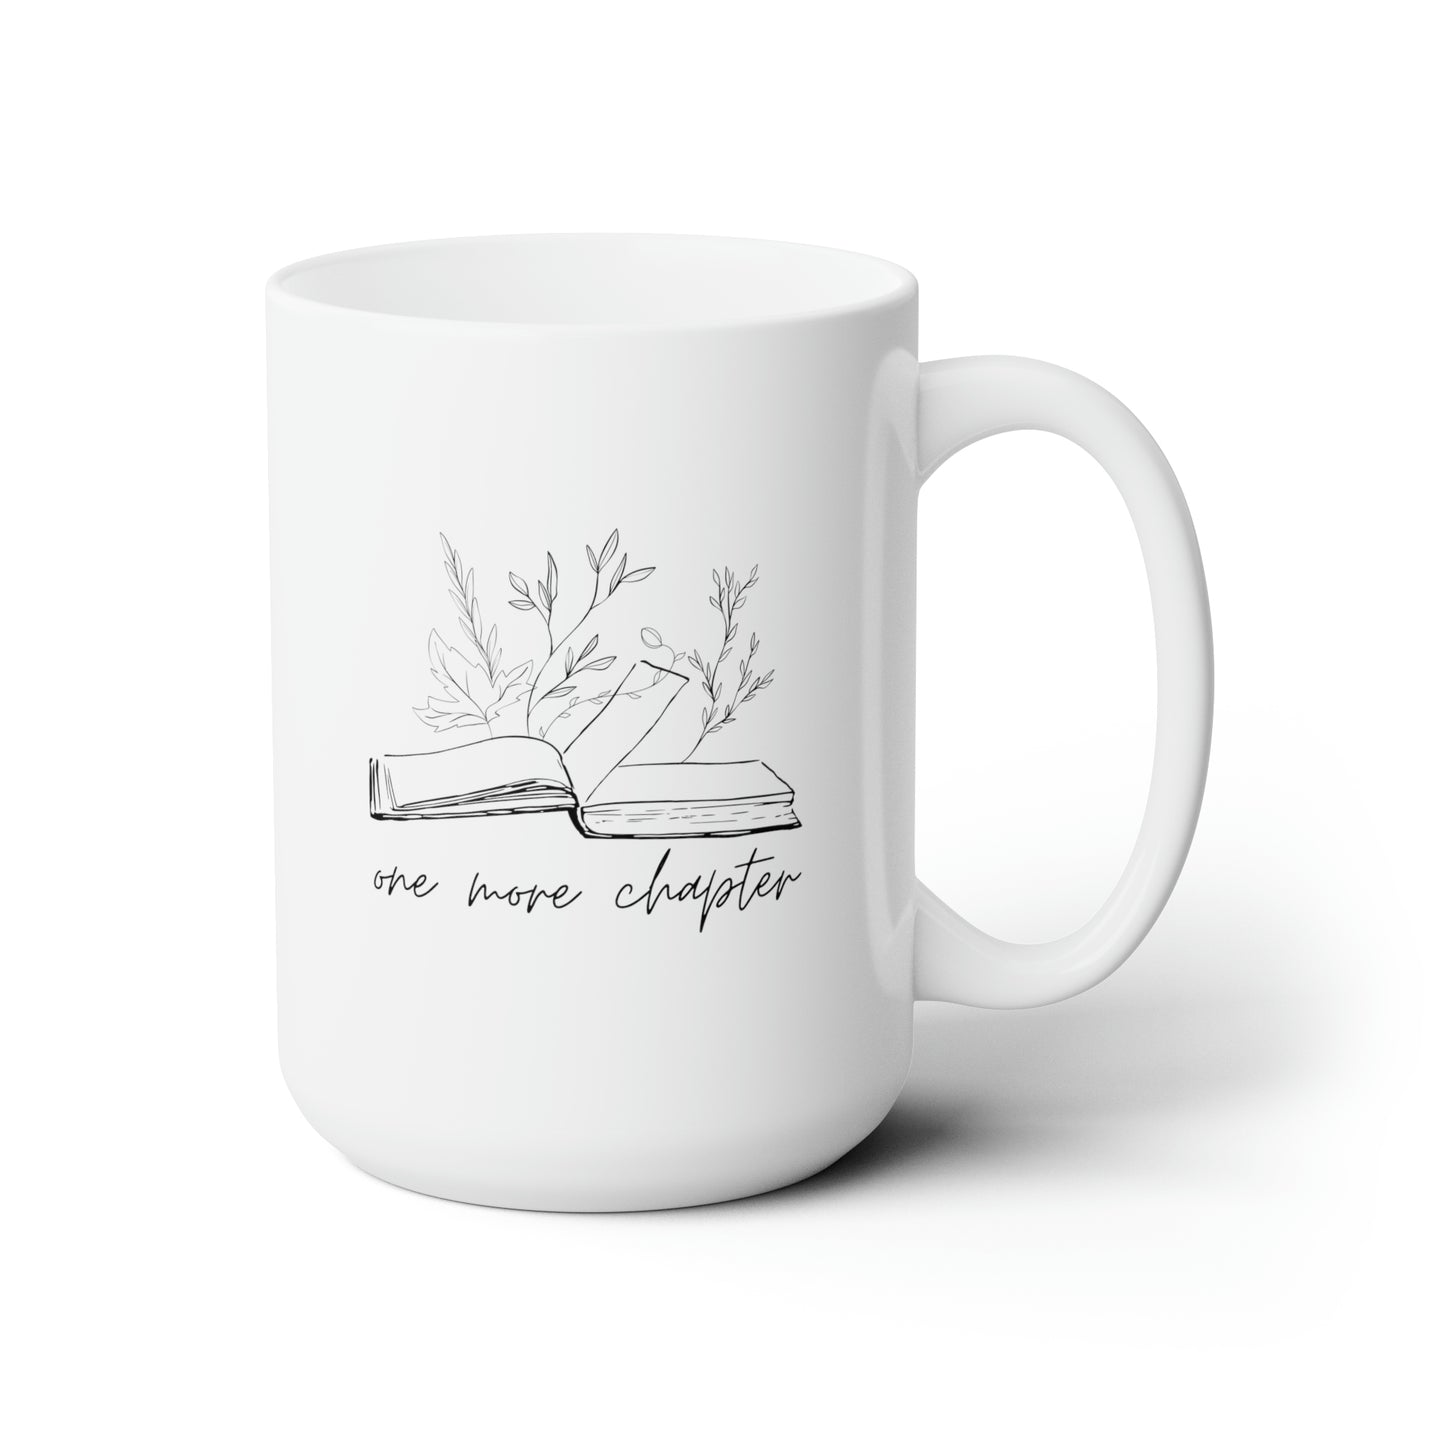 One More Chapter 15oz white funny large coffee mug gift for bookworm reading trending now women librarian book lover teacher nerd waveywares wavey wares wavywares wavy wares